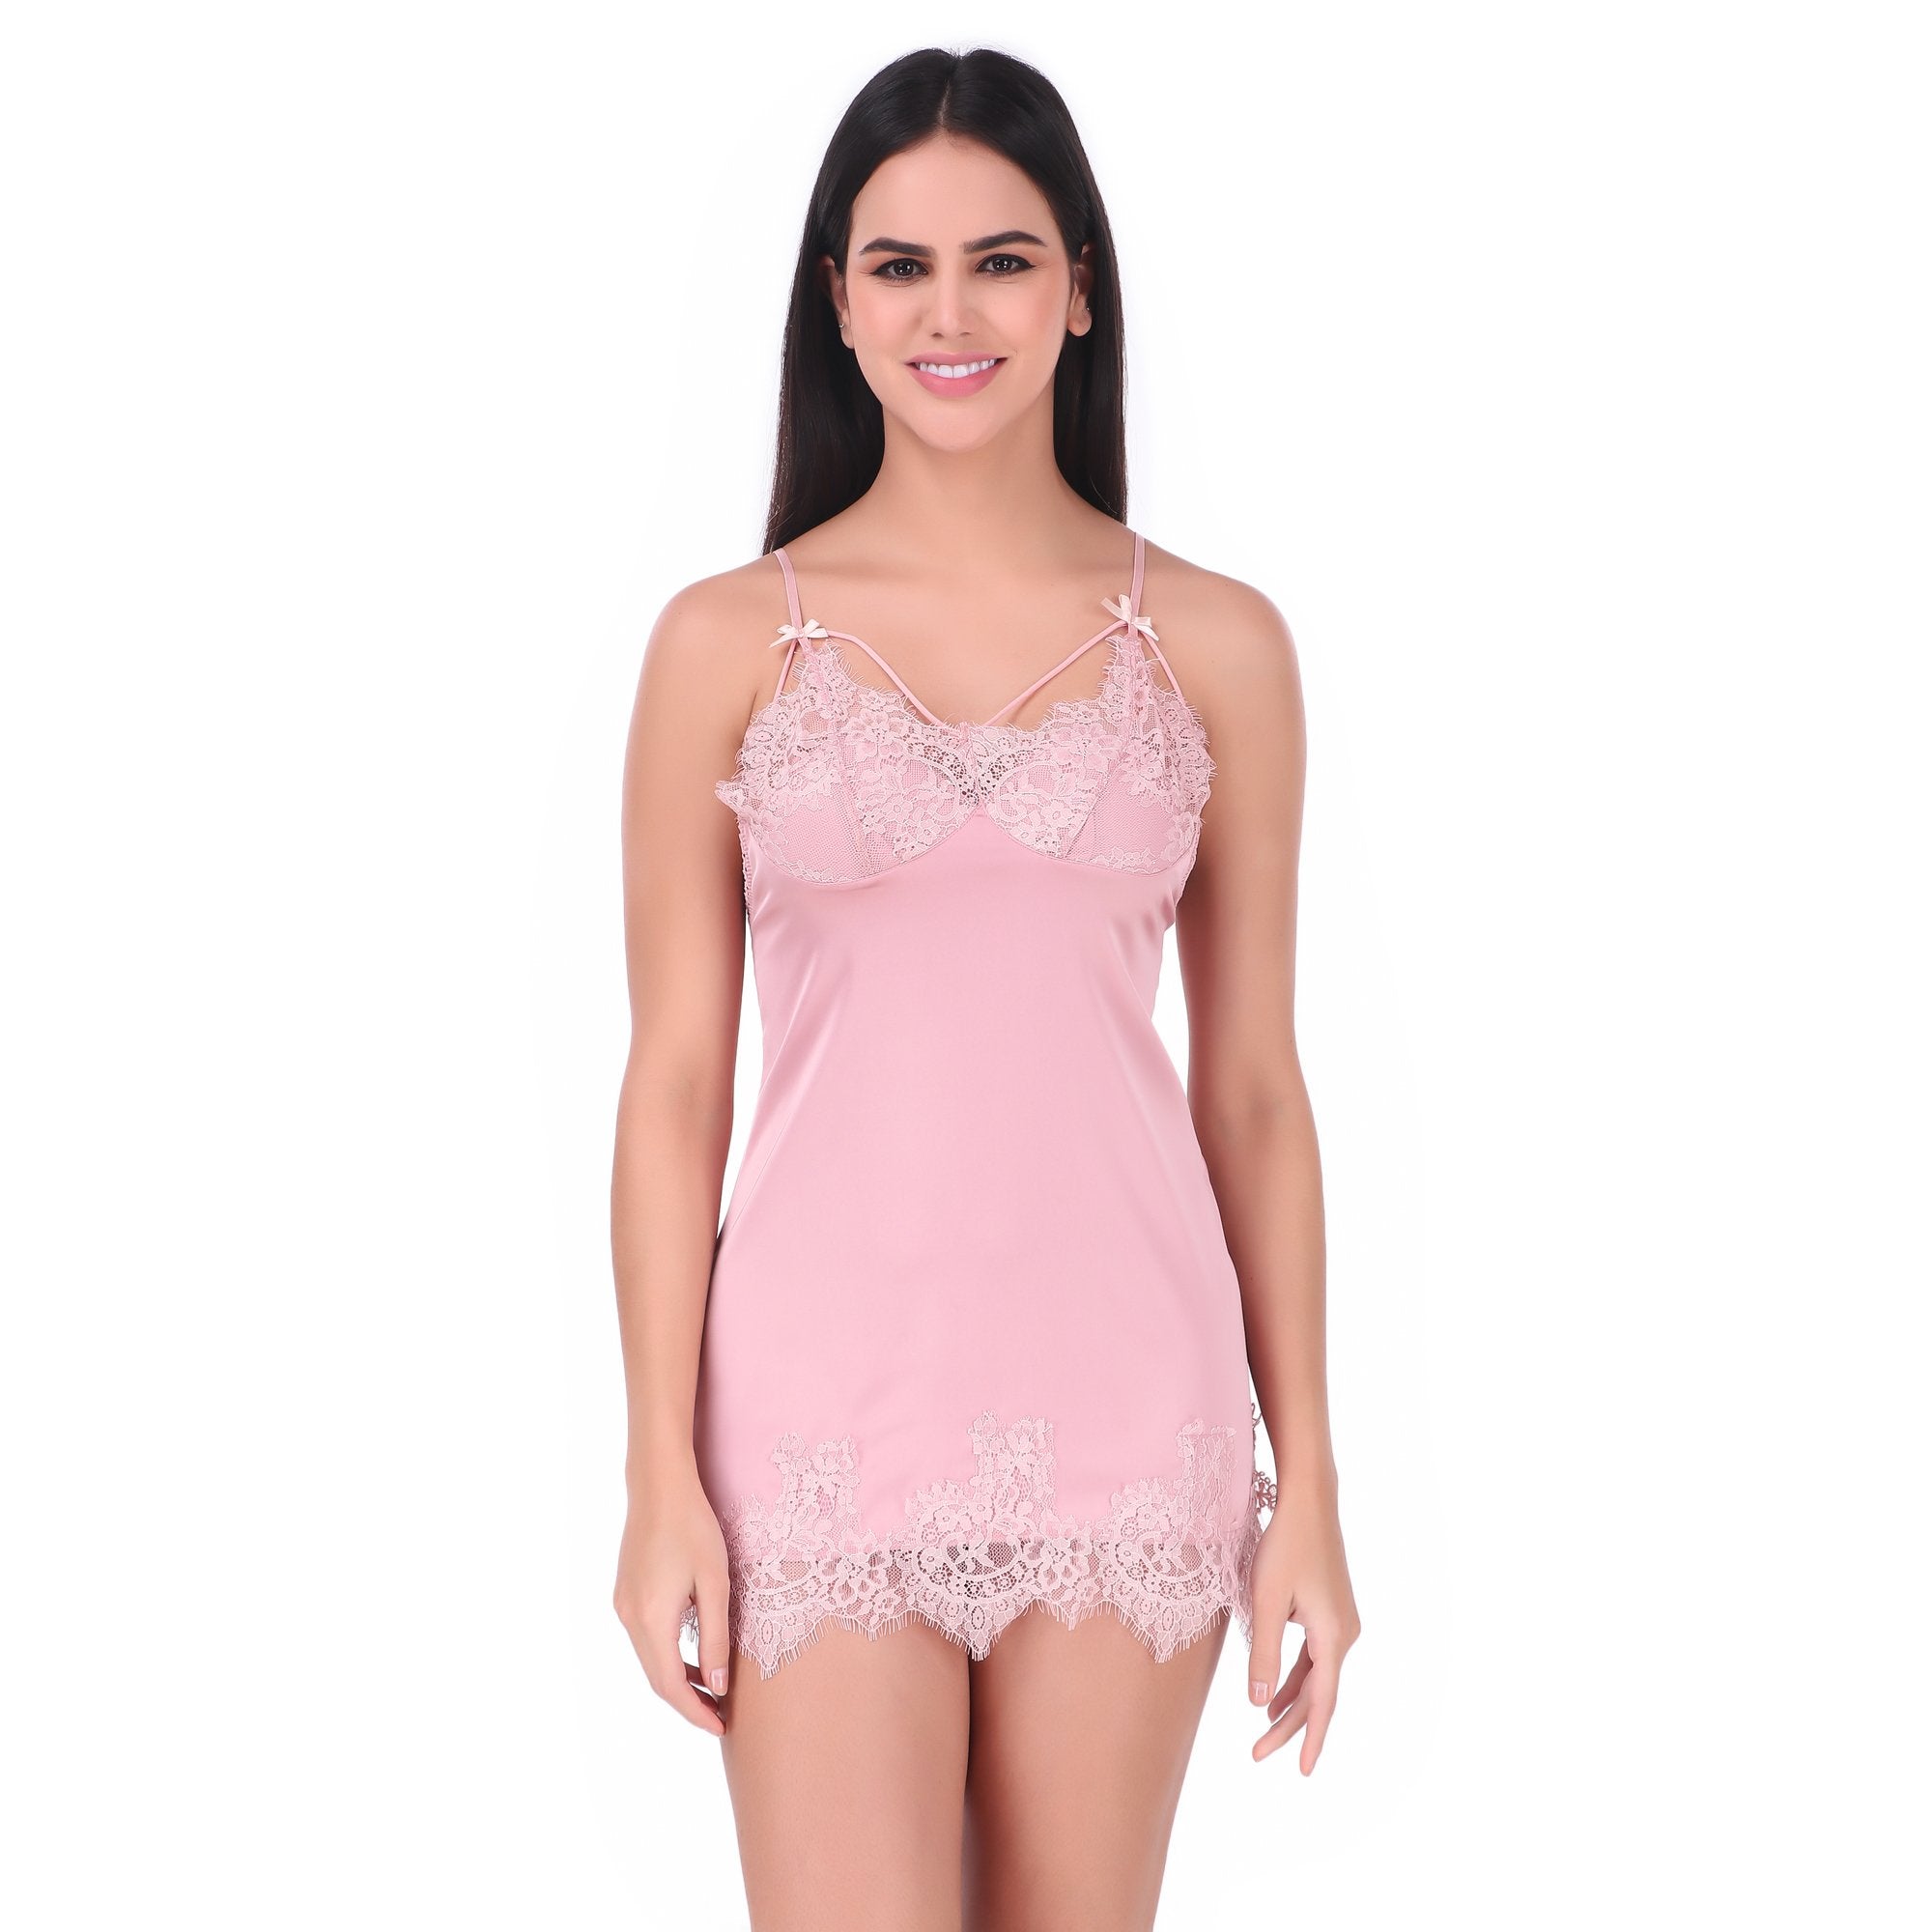 AXTZH-XNTSSATRD004  luxuriously smooth satin soft lace strap nighty with a sexy fit and soft feel